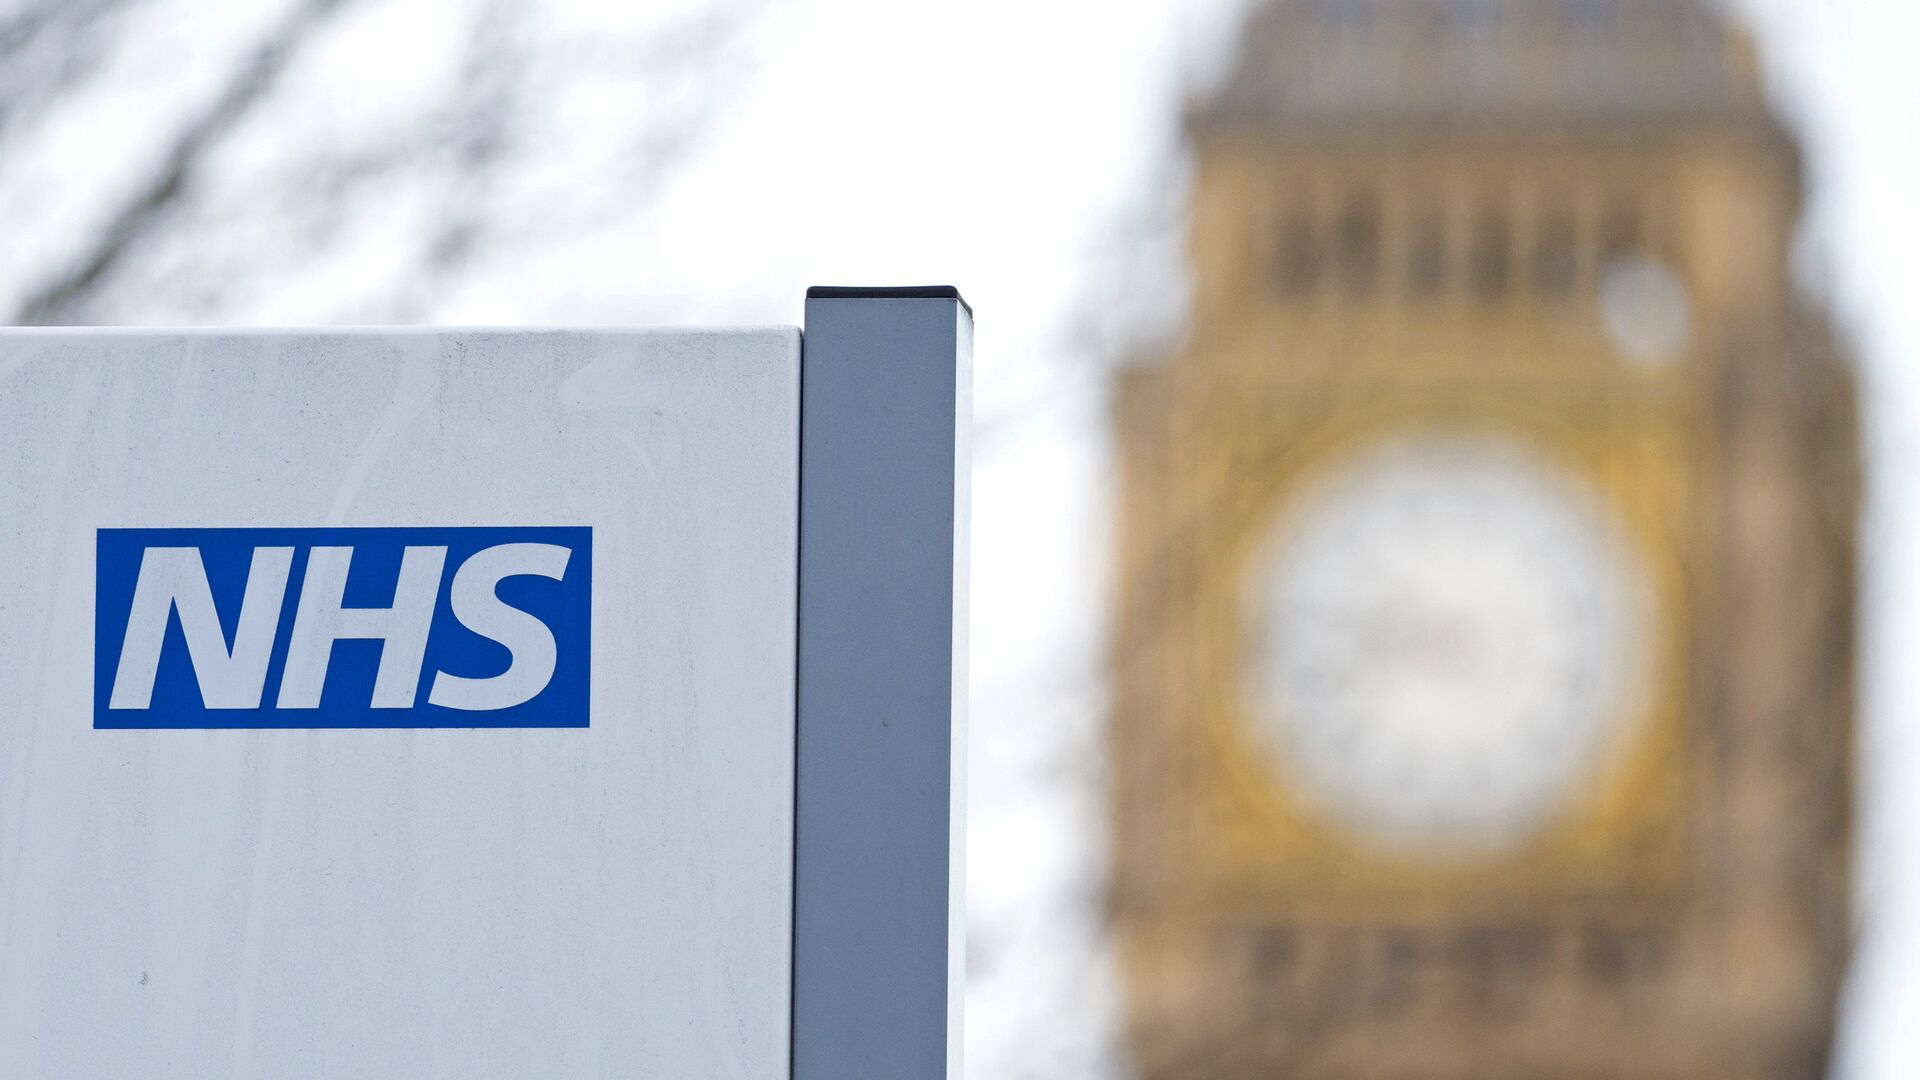 An NHS sign is pictured at St Thomas' Hospital in front of the Big Ben clock face and the Elizabeth Tower on January 13, 2017 in London.  - Sputnik International, 1920, 30.03.2022